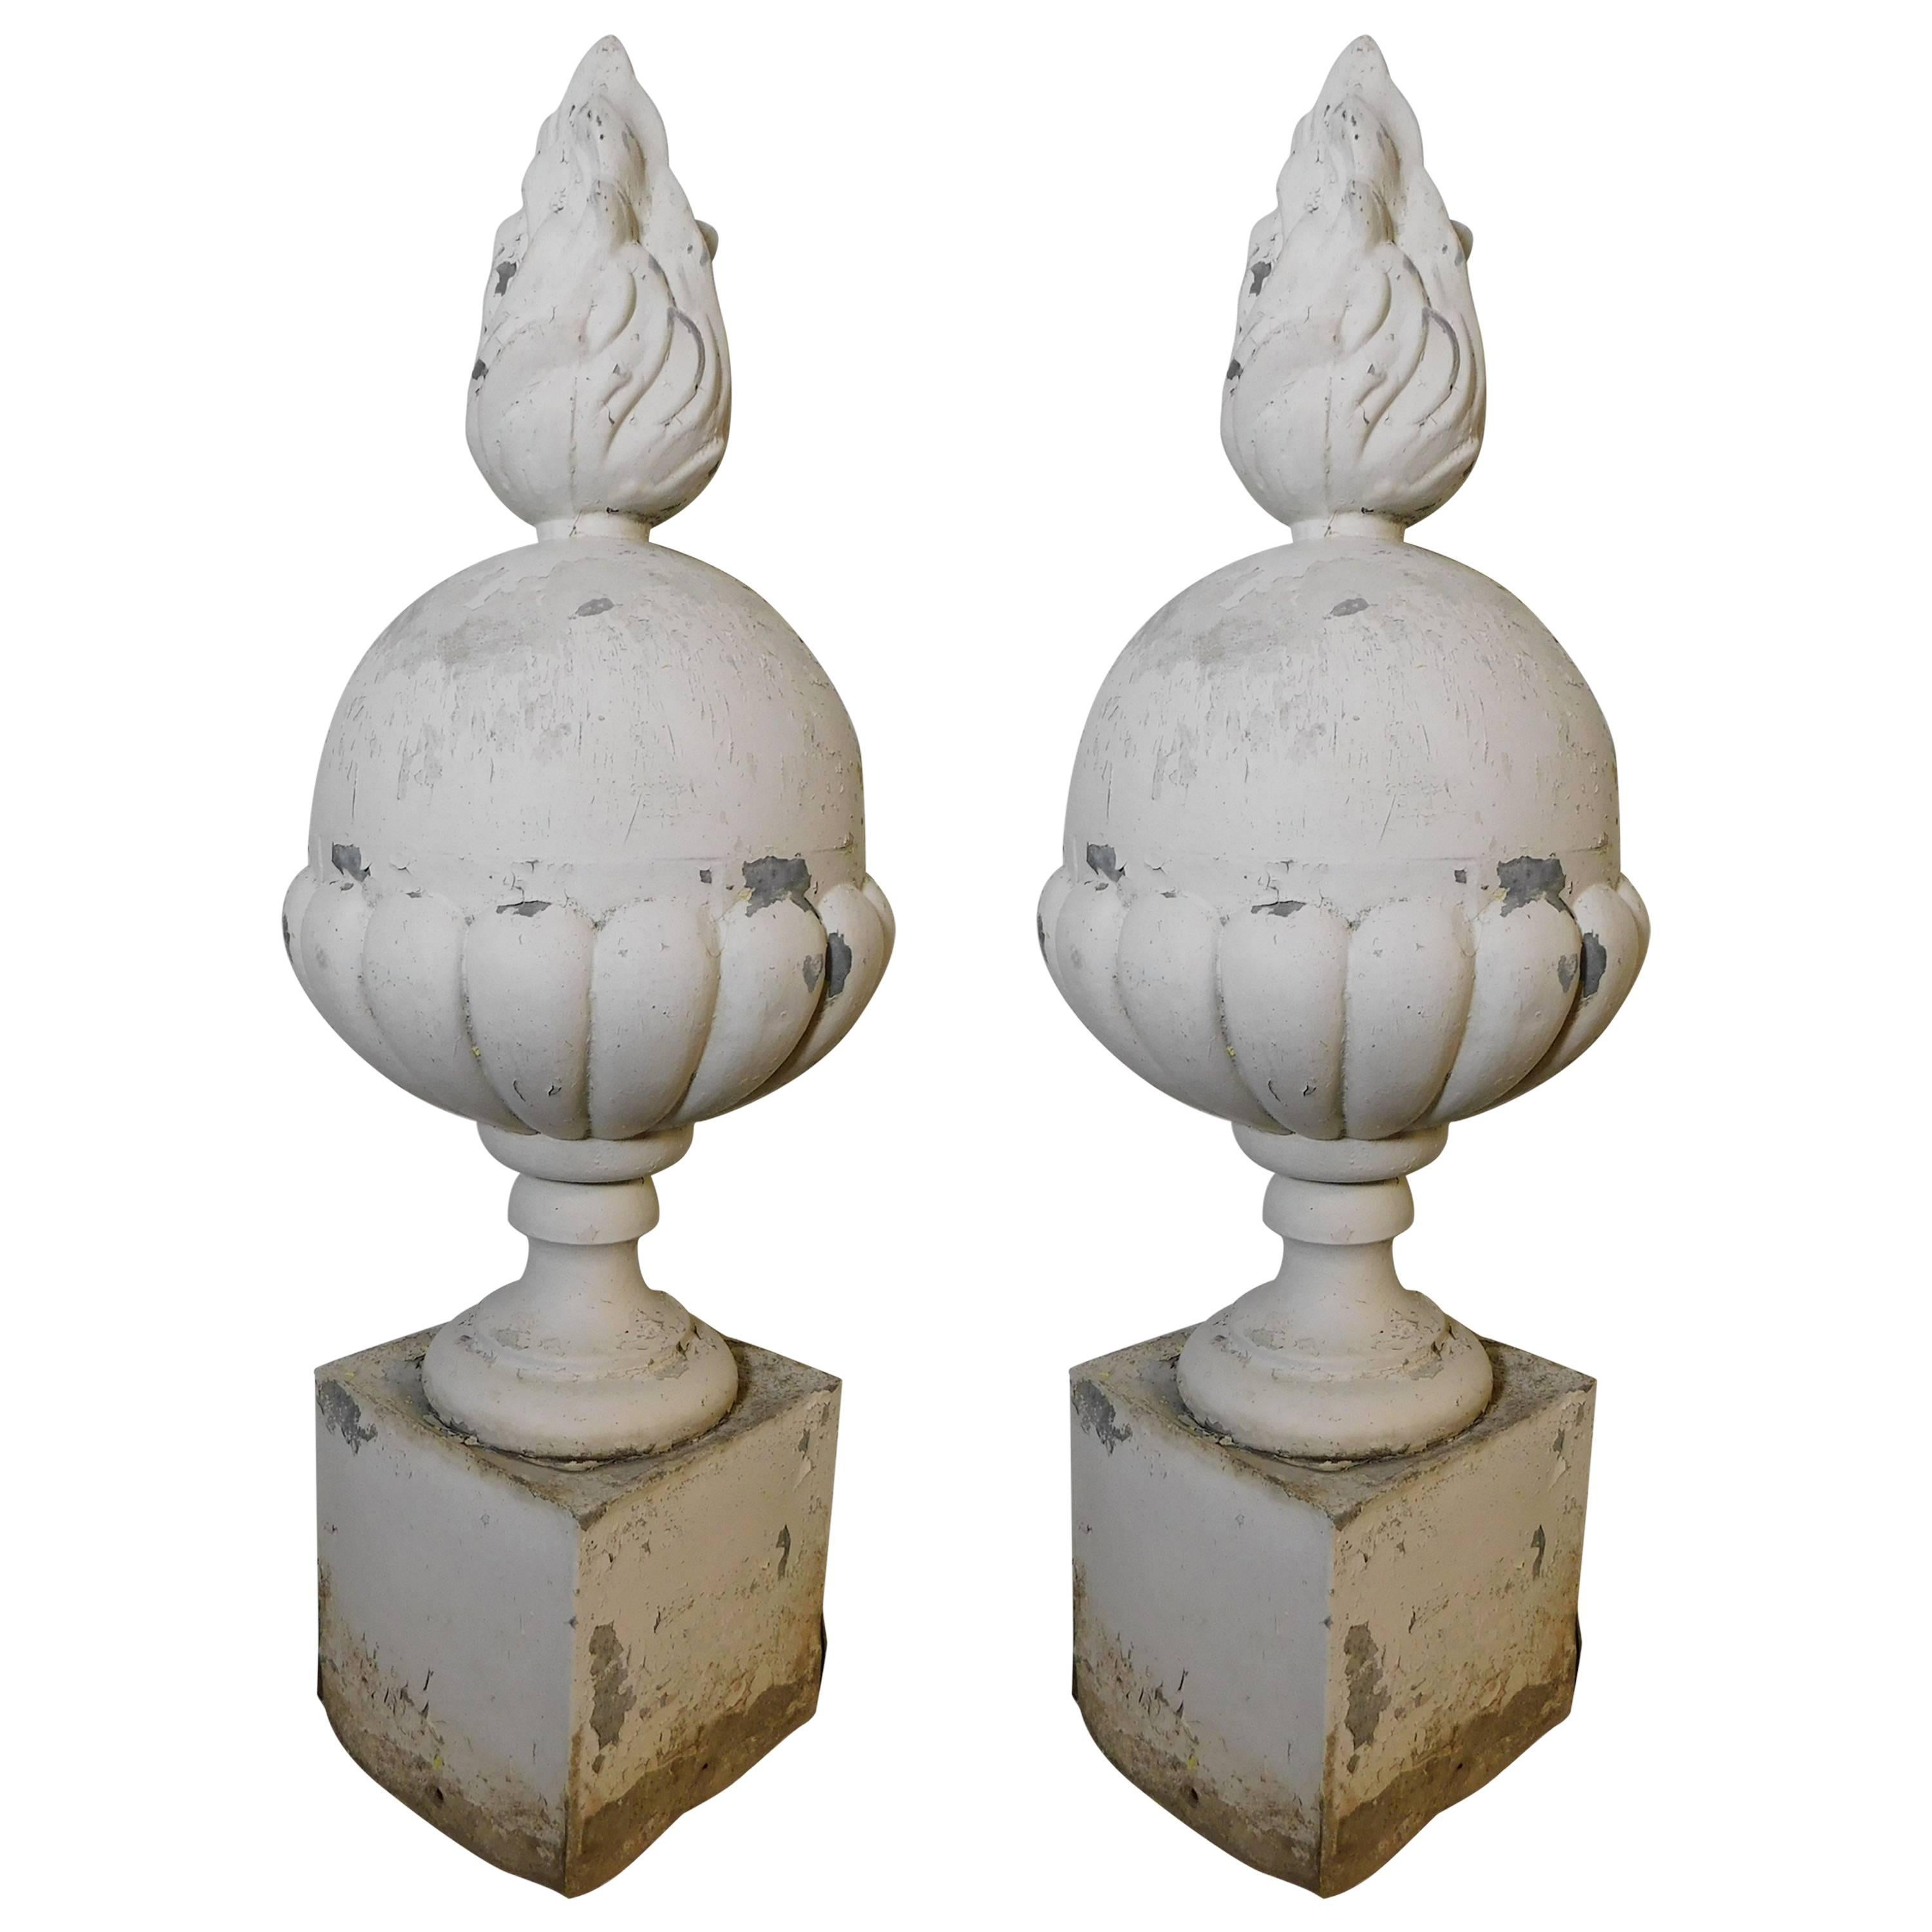 Pair of Italian Architectural Ornate Metal Flame Finials 